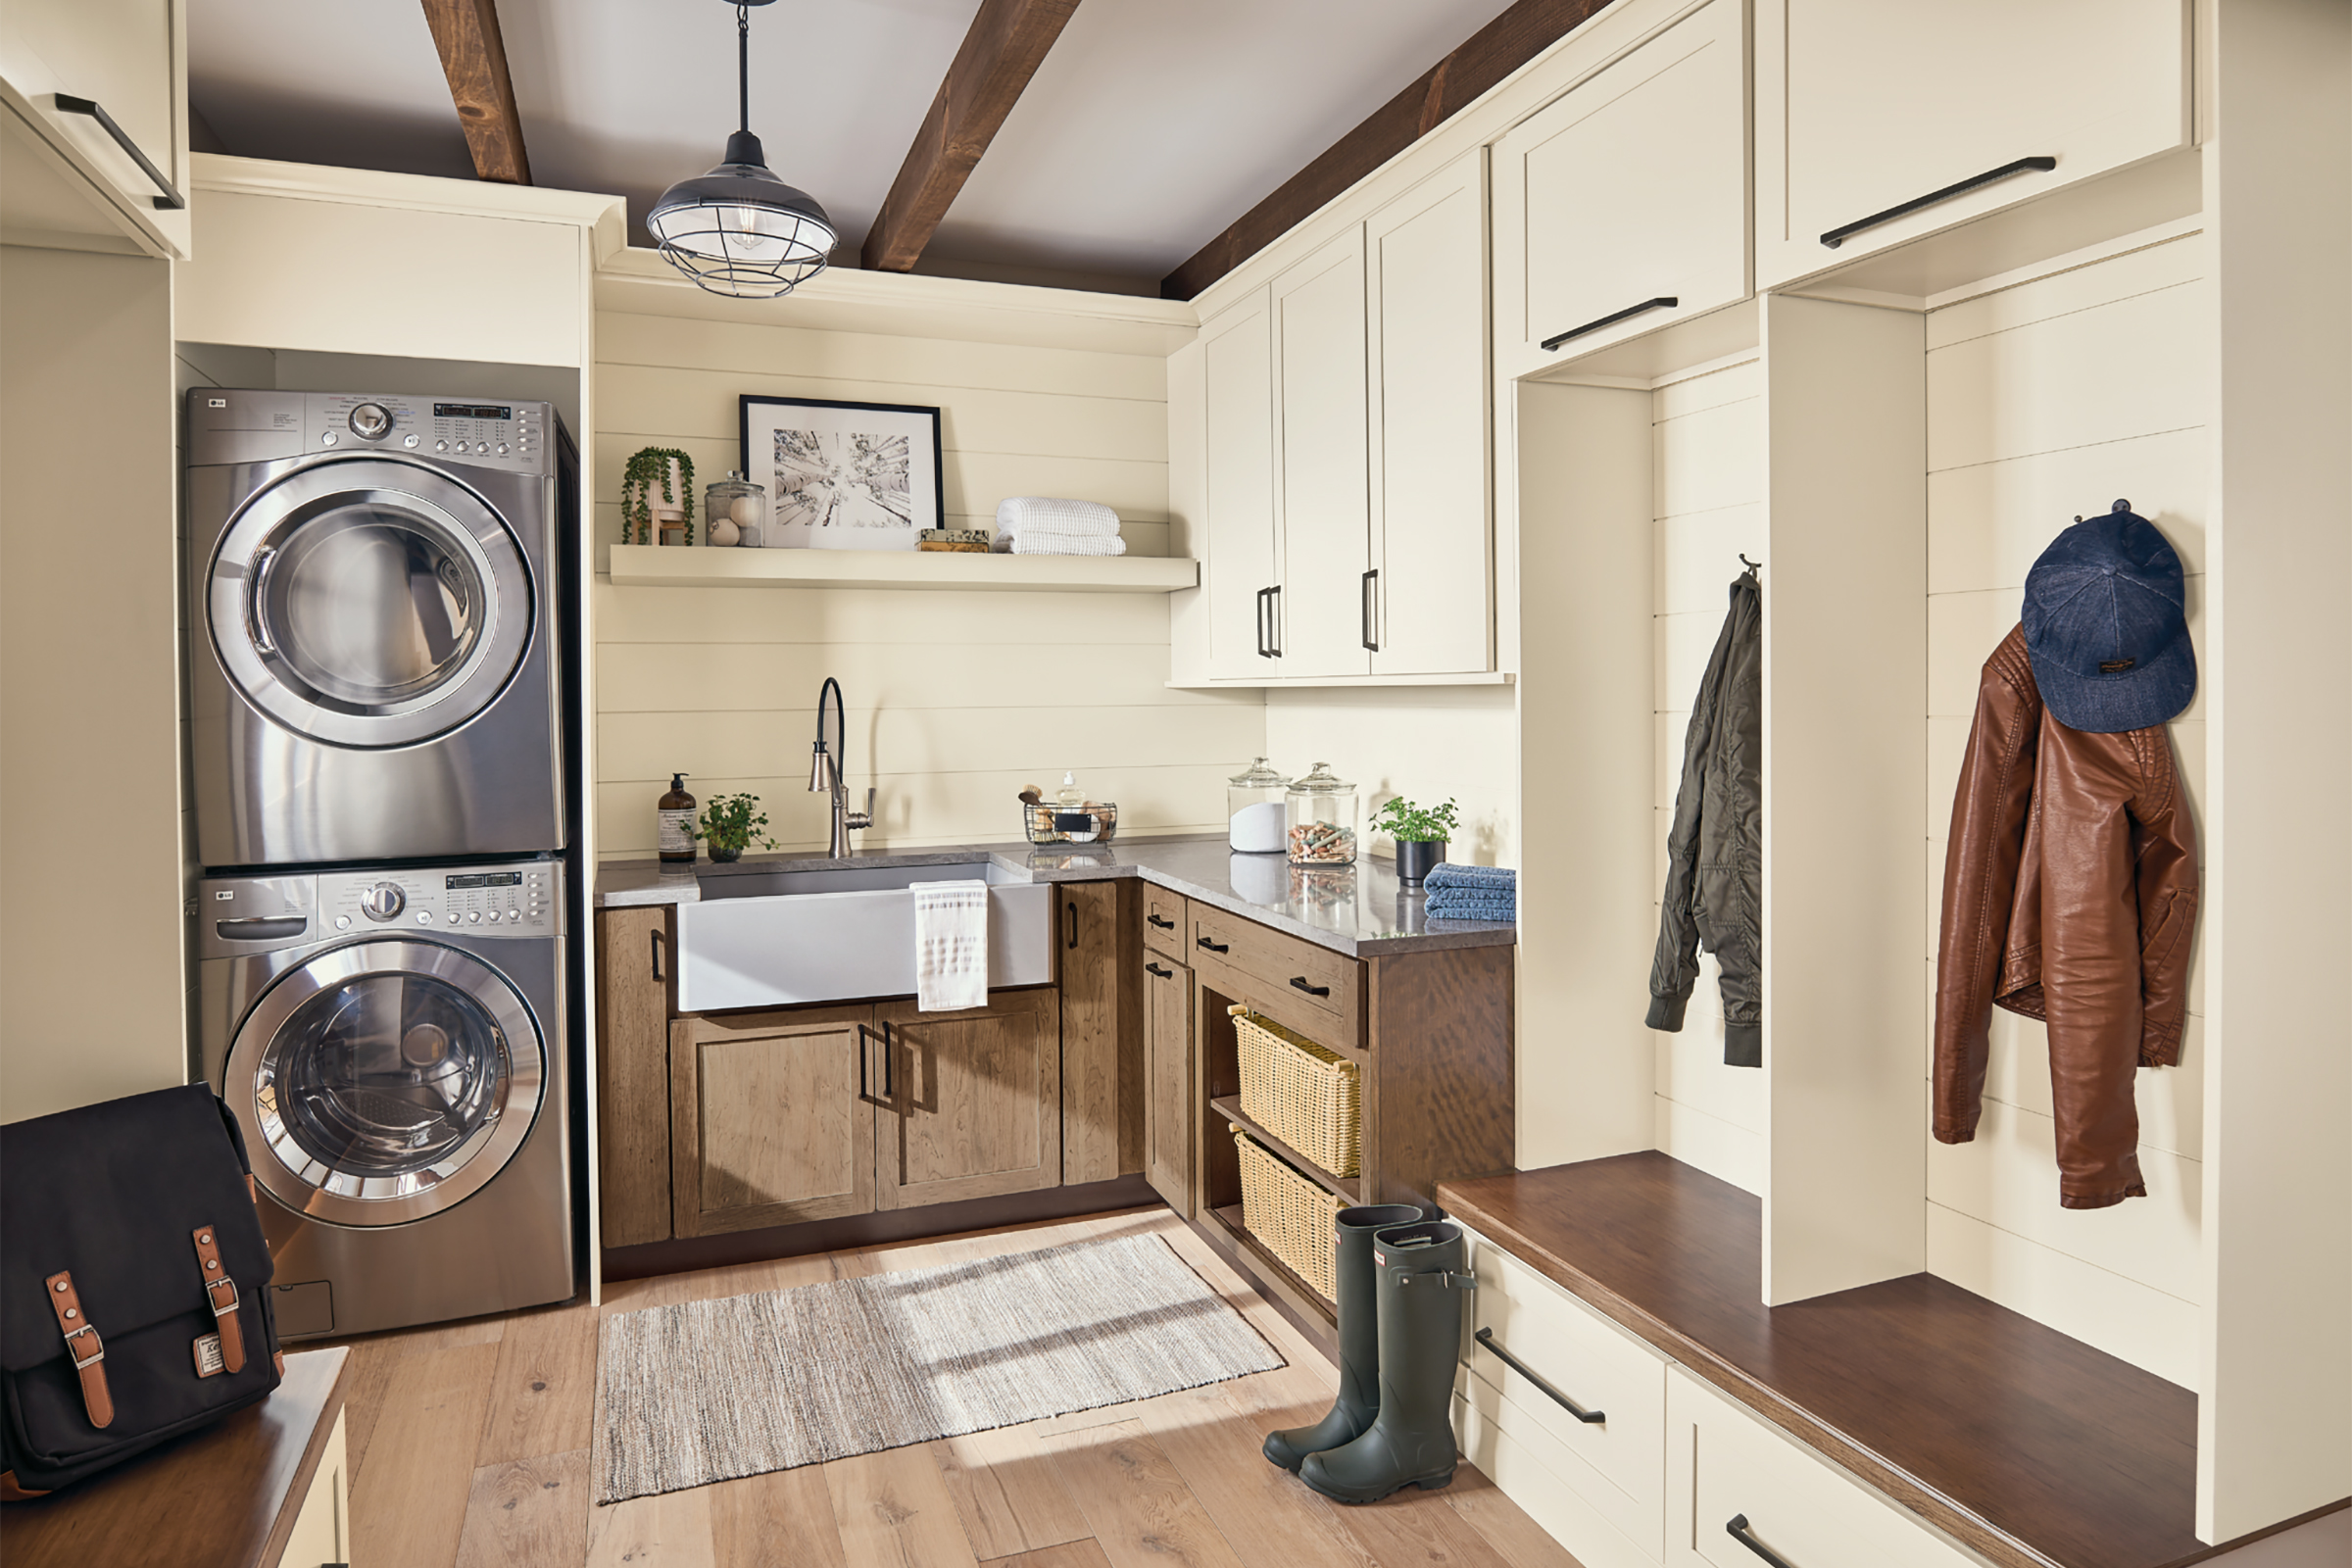 KraftMaid mudroom lockers with integrated utility sink for your laundry room cabinets